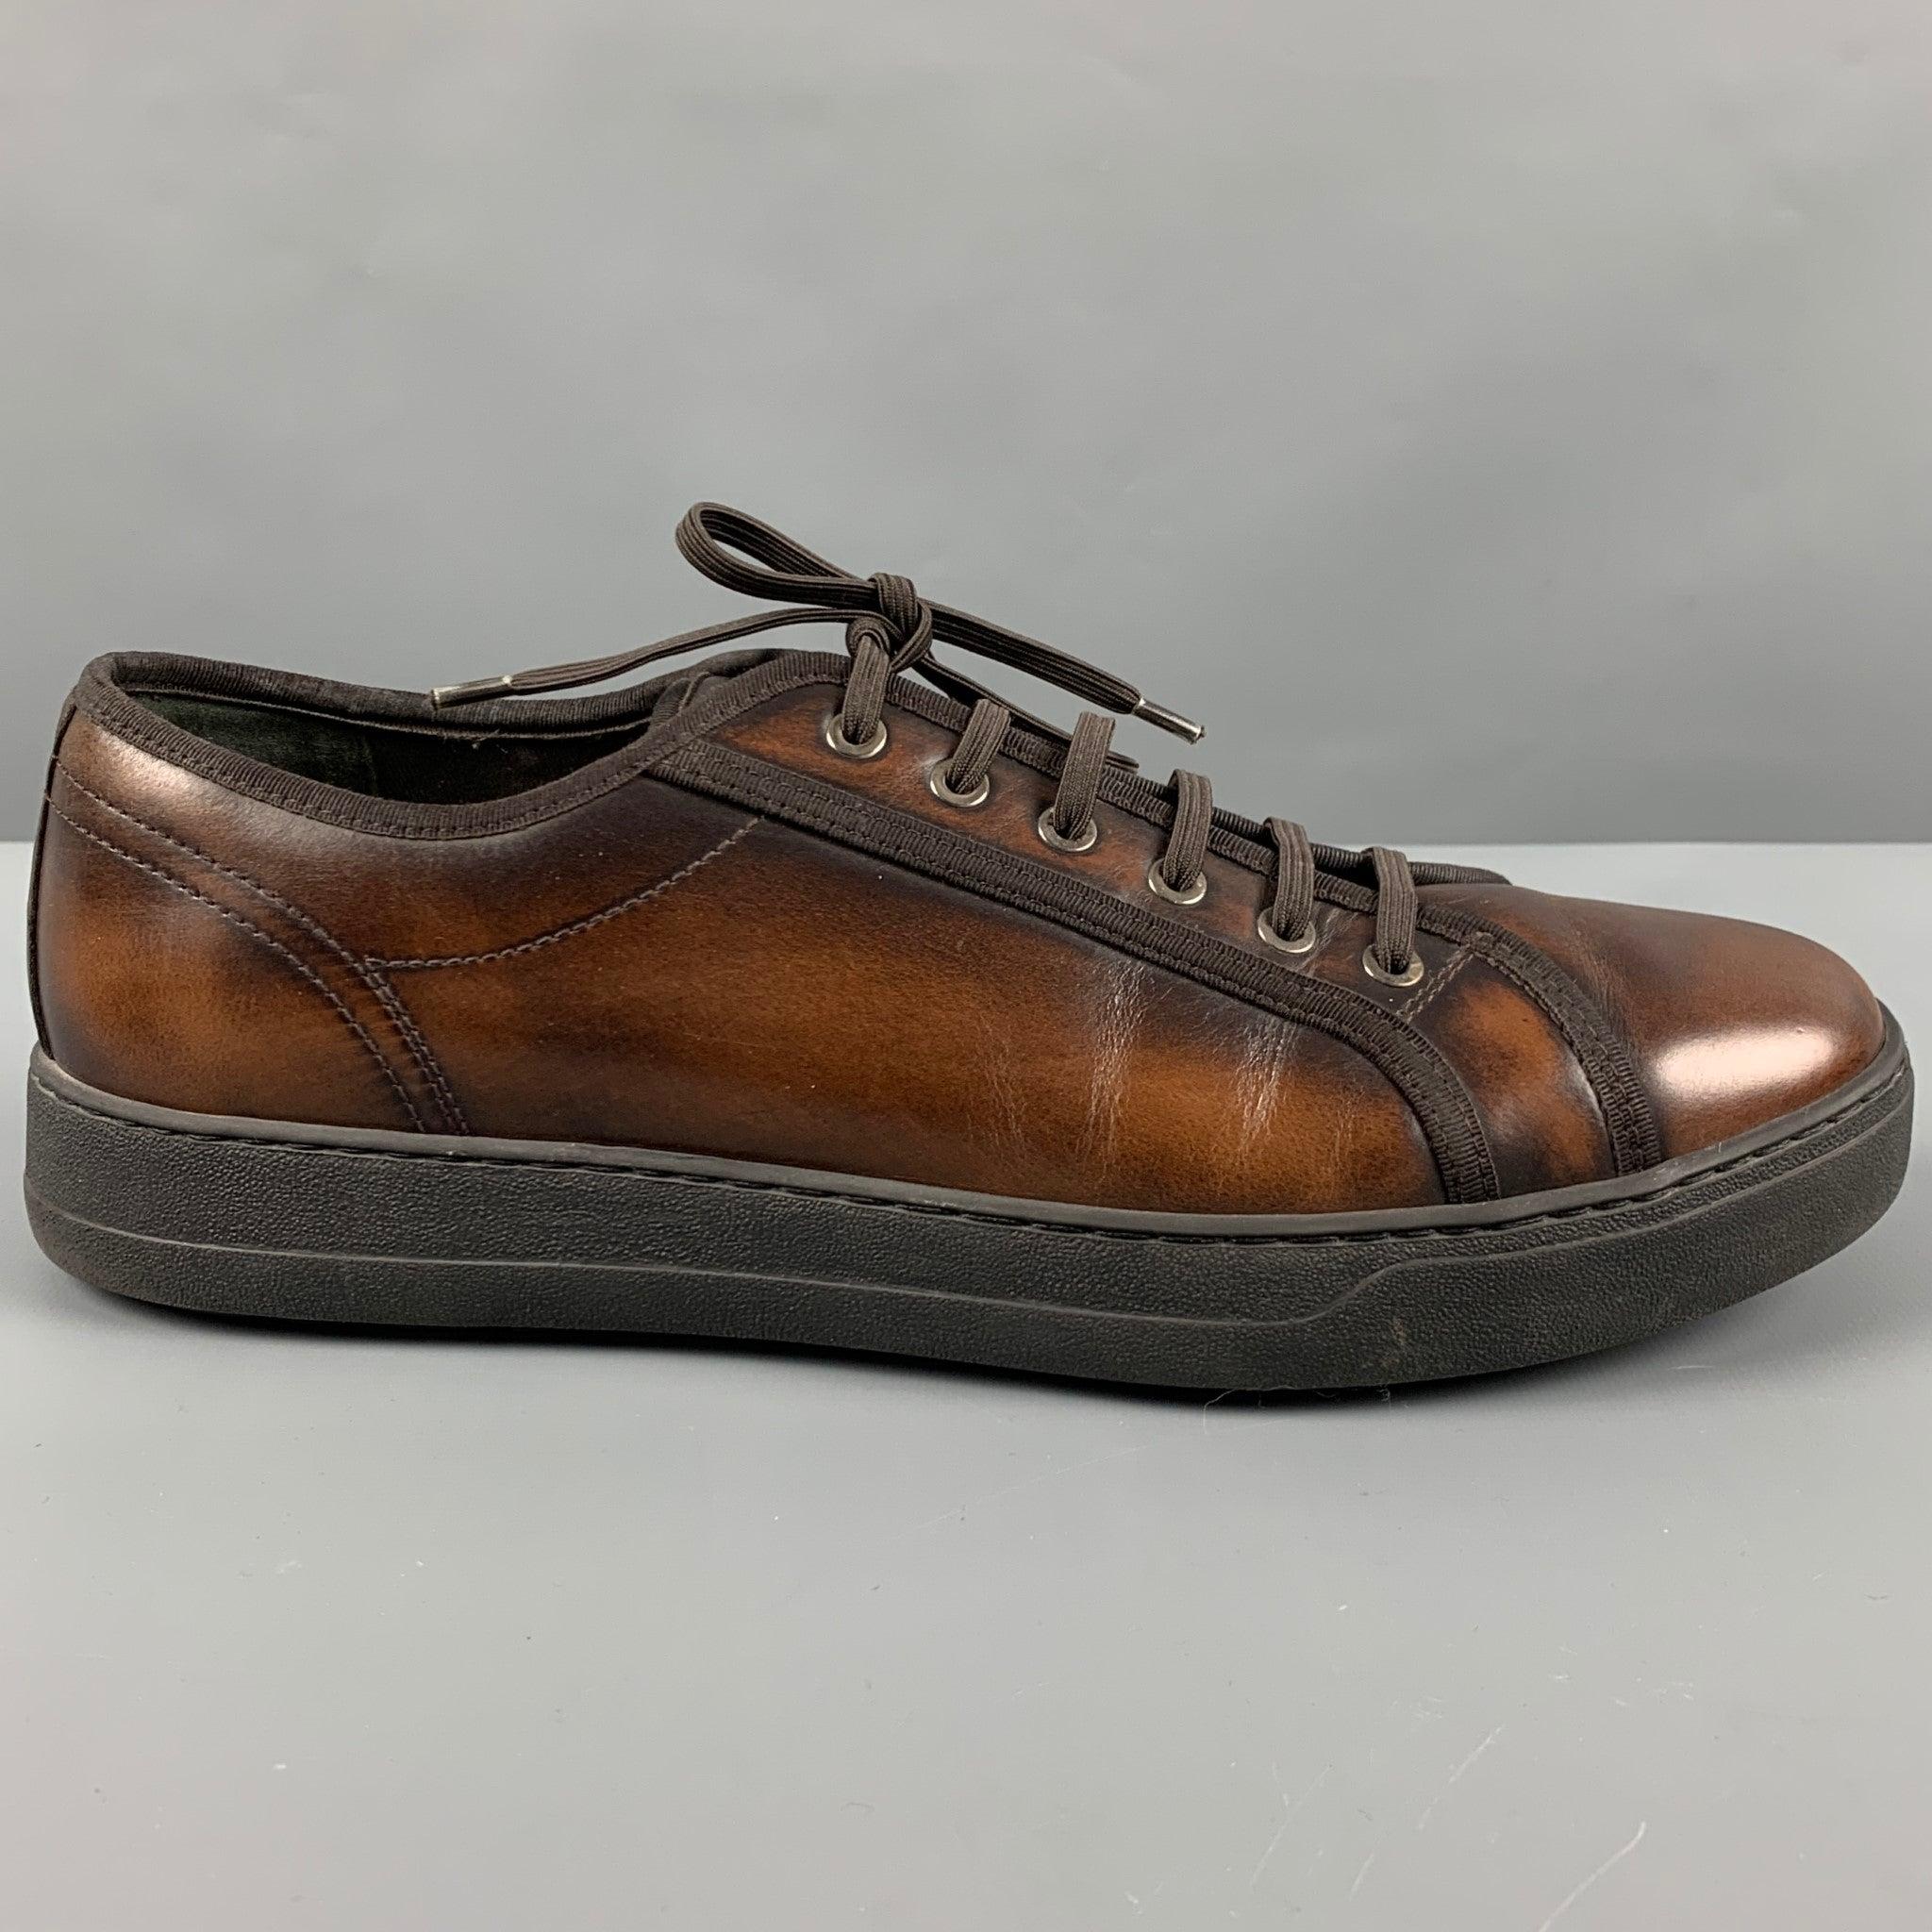 SALVATORE FERRAGAMO sneakers
in a brown leather fabric featuring burnished look, rubber sole, and lace-up closure. Made in Italy.Excellent Pre-Owned Condition. 

Marked:   TZ 41188 A16S 10 EEOutsole: 12 inches  x 4.25 inches 
  
  
 
Reference: